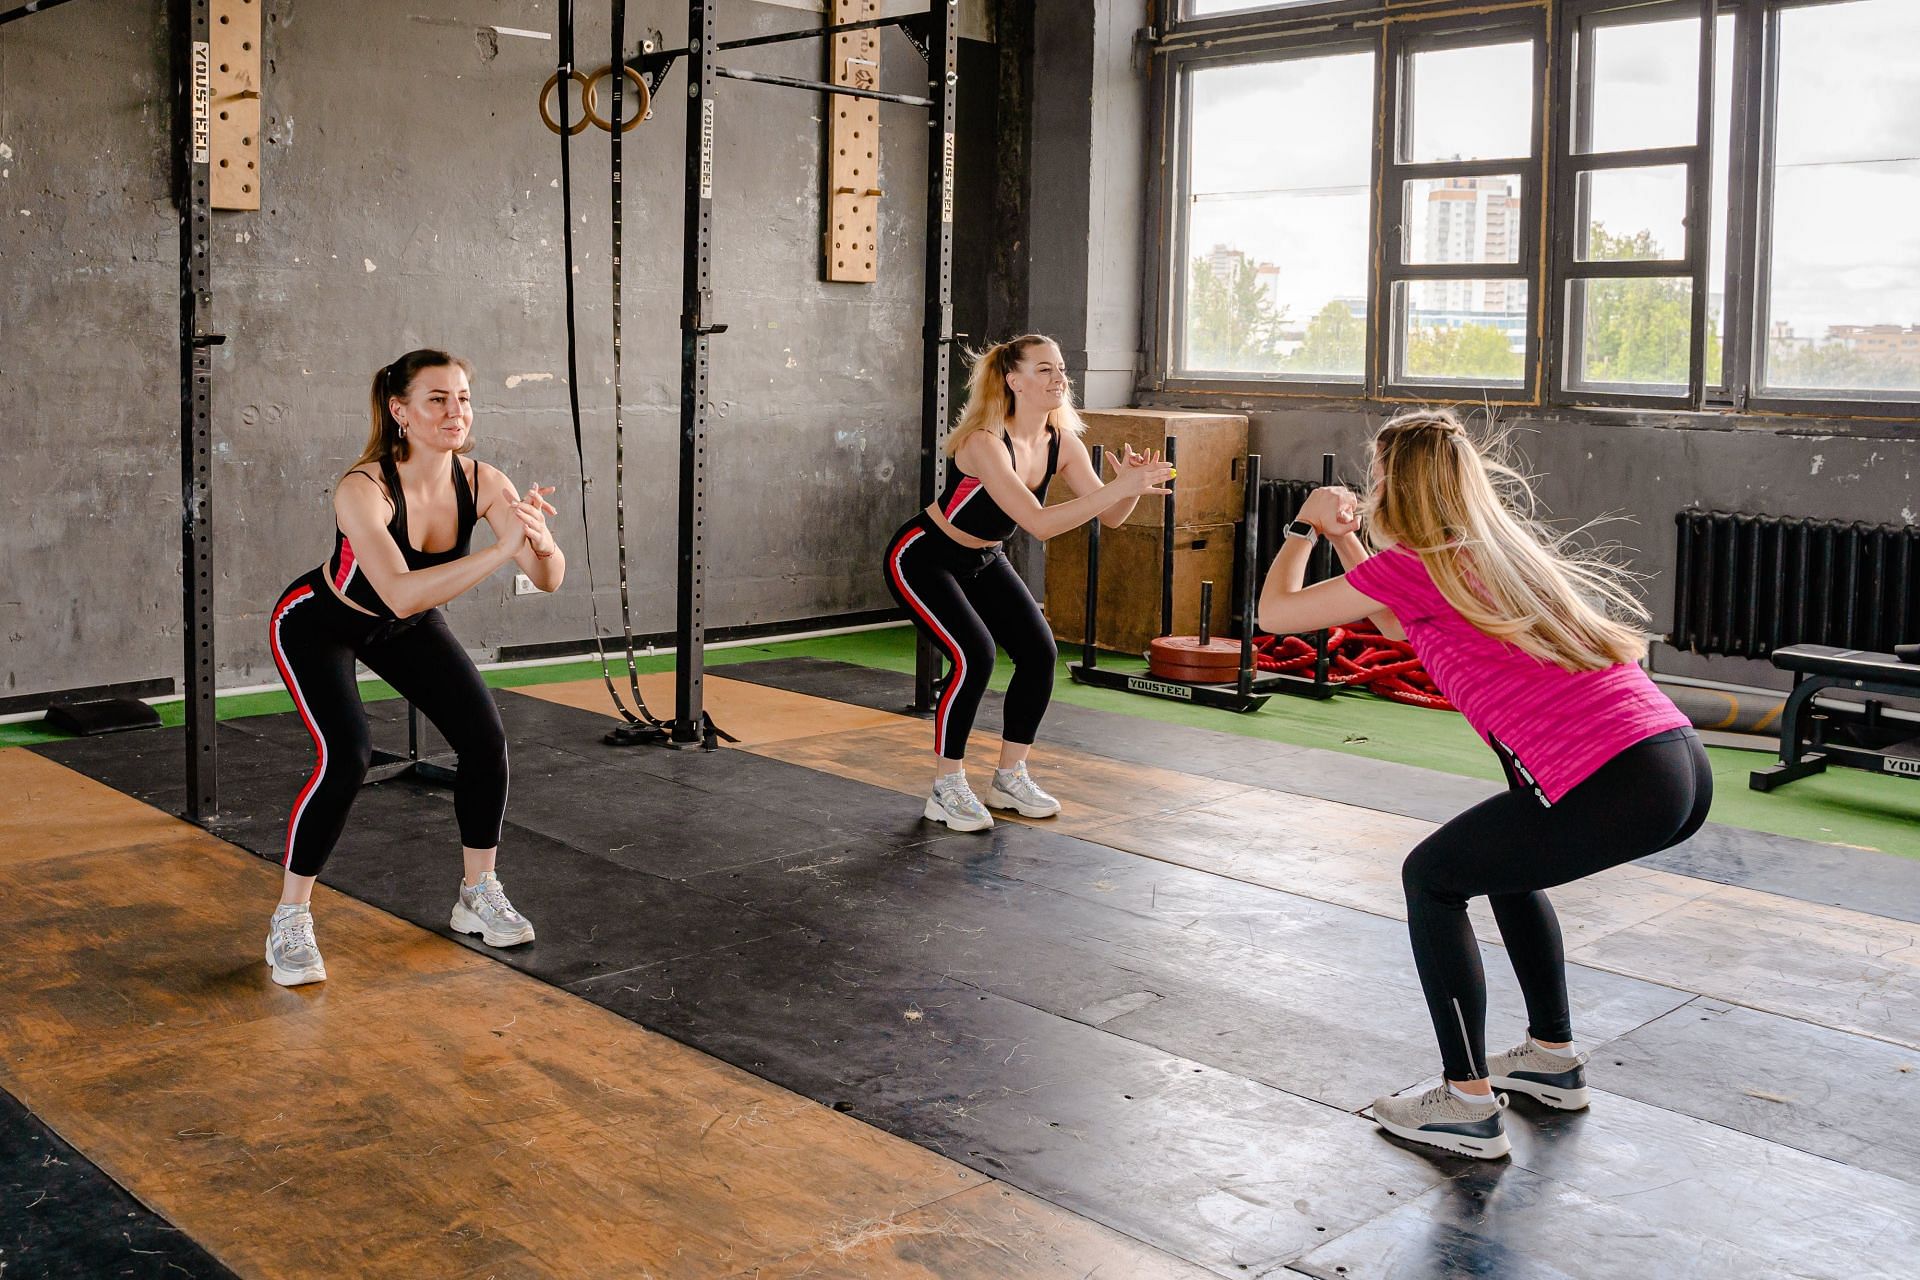 Using squats to finish your workouts (image sourced via Pexels / Photo by antoni)